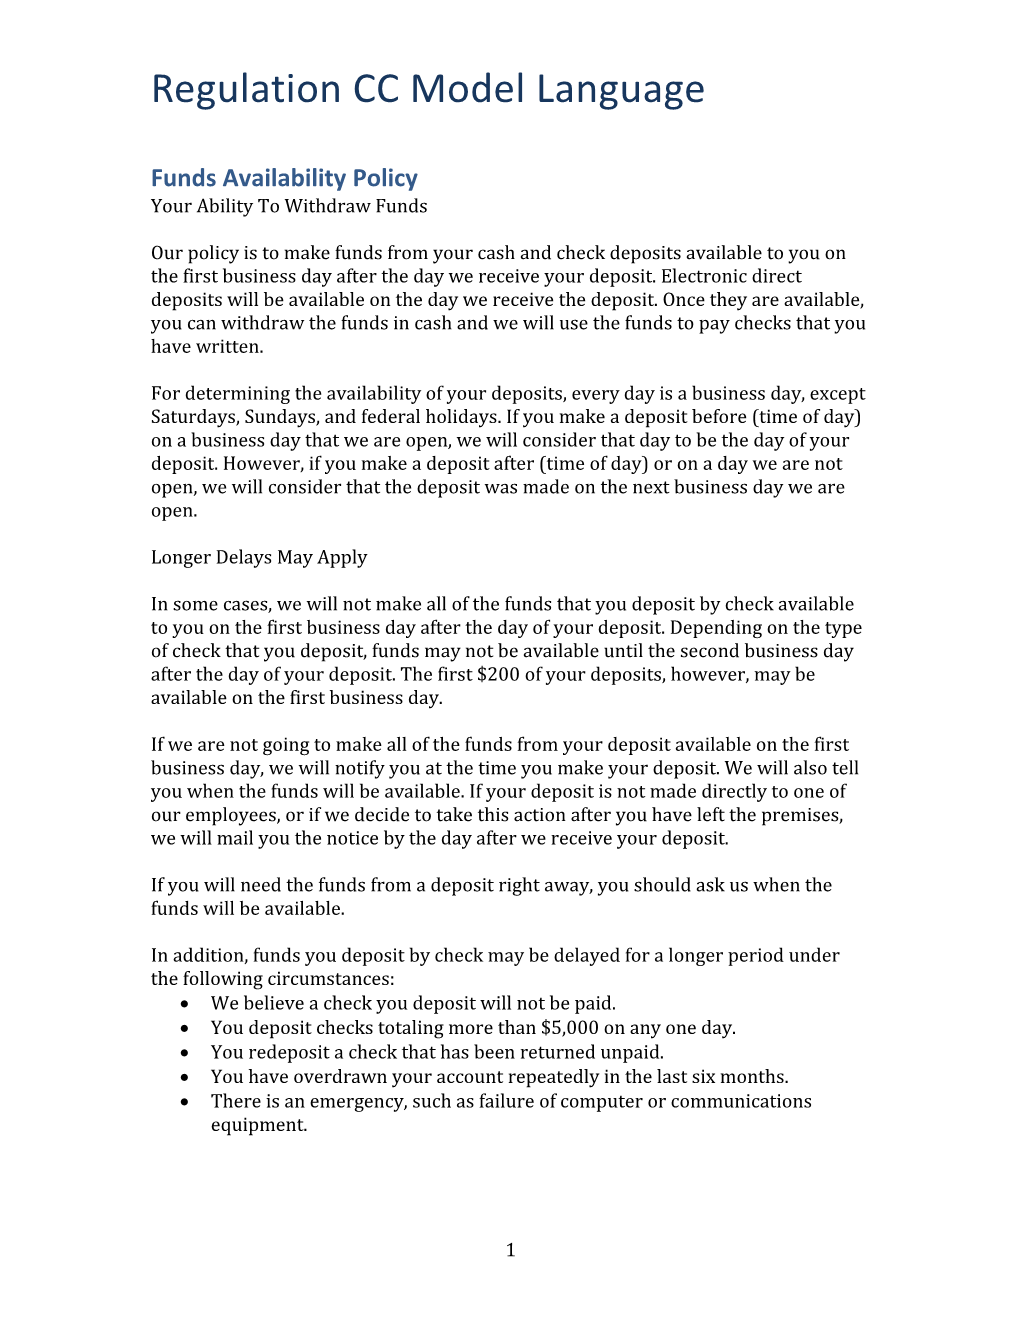 Funds Availability Policy